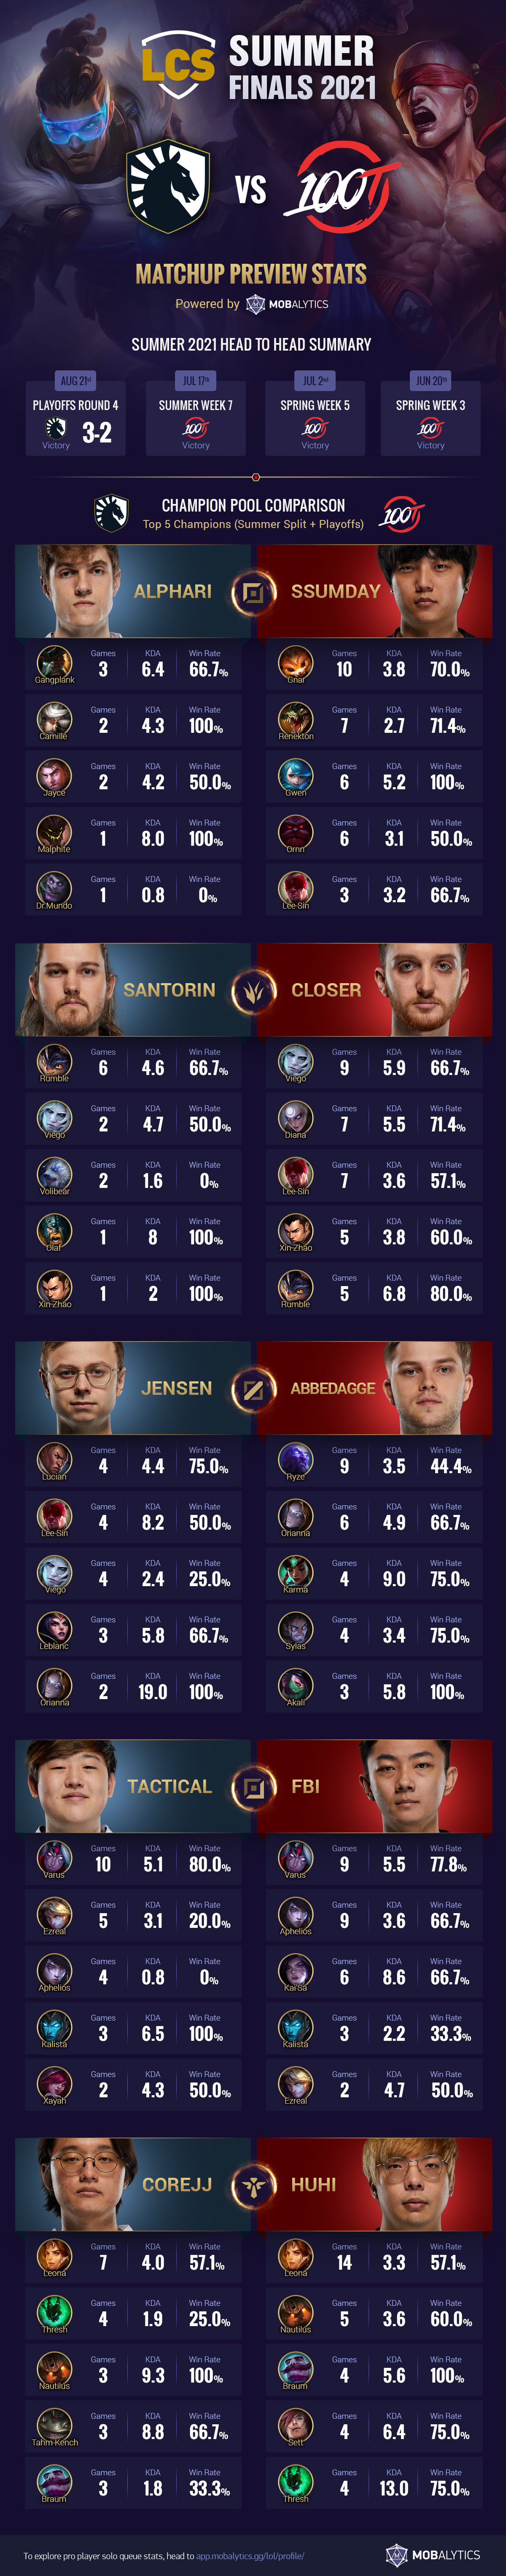 2021 LCS Summer Finals: TL vs 100T - Matchup Preview Stats (Infographic)